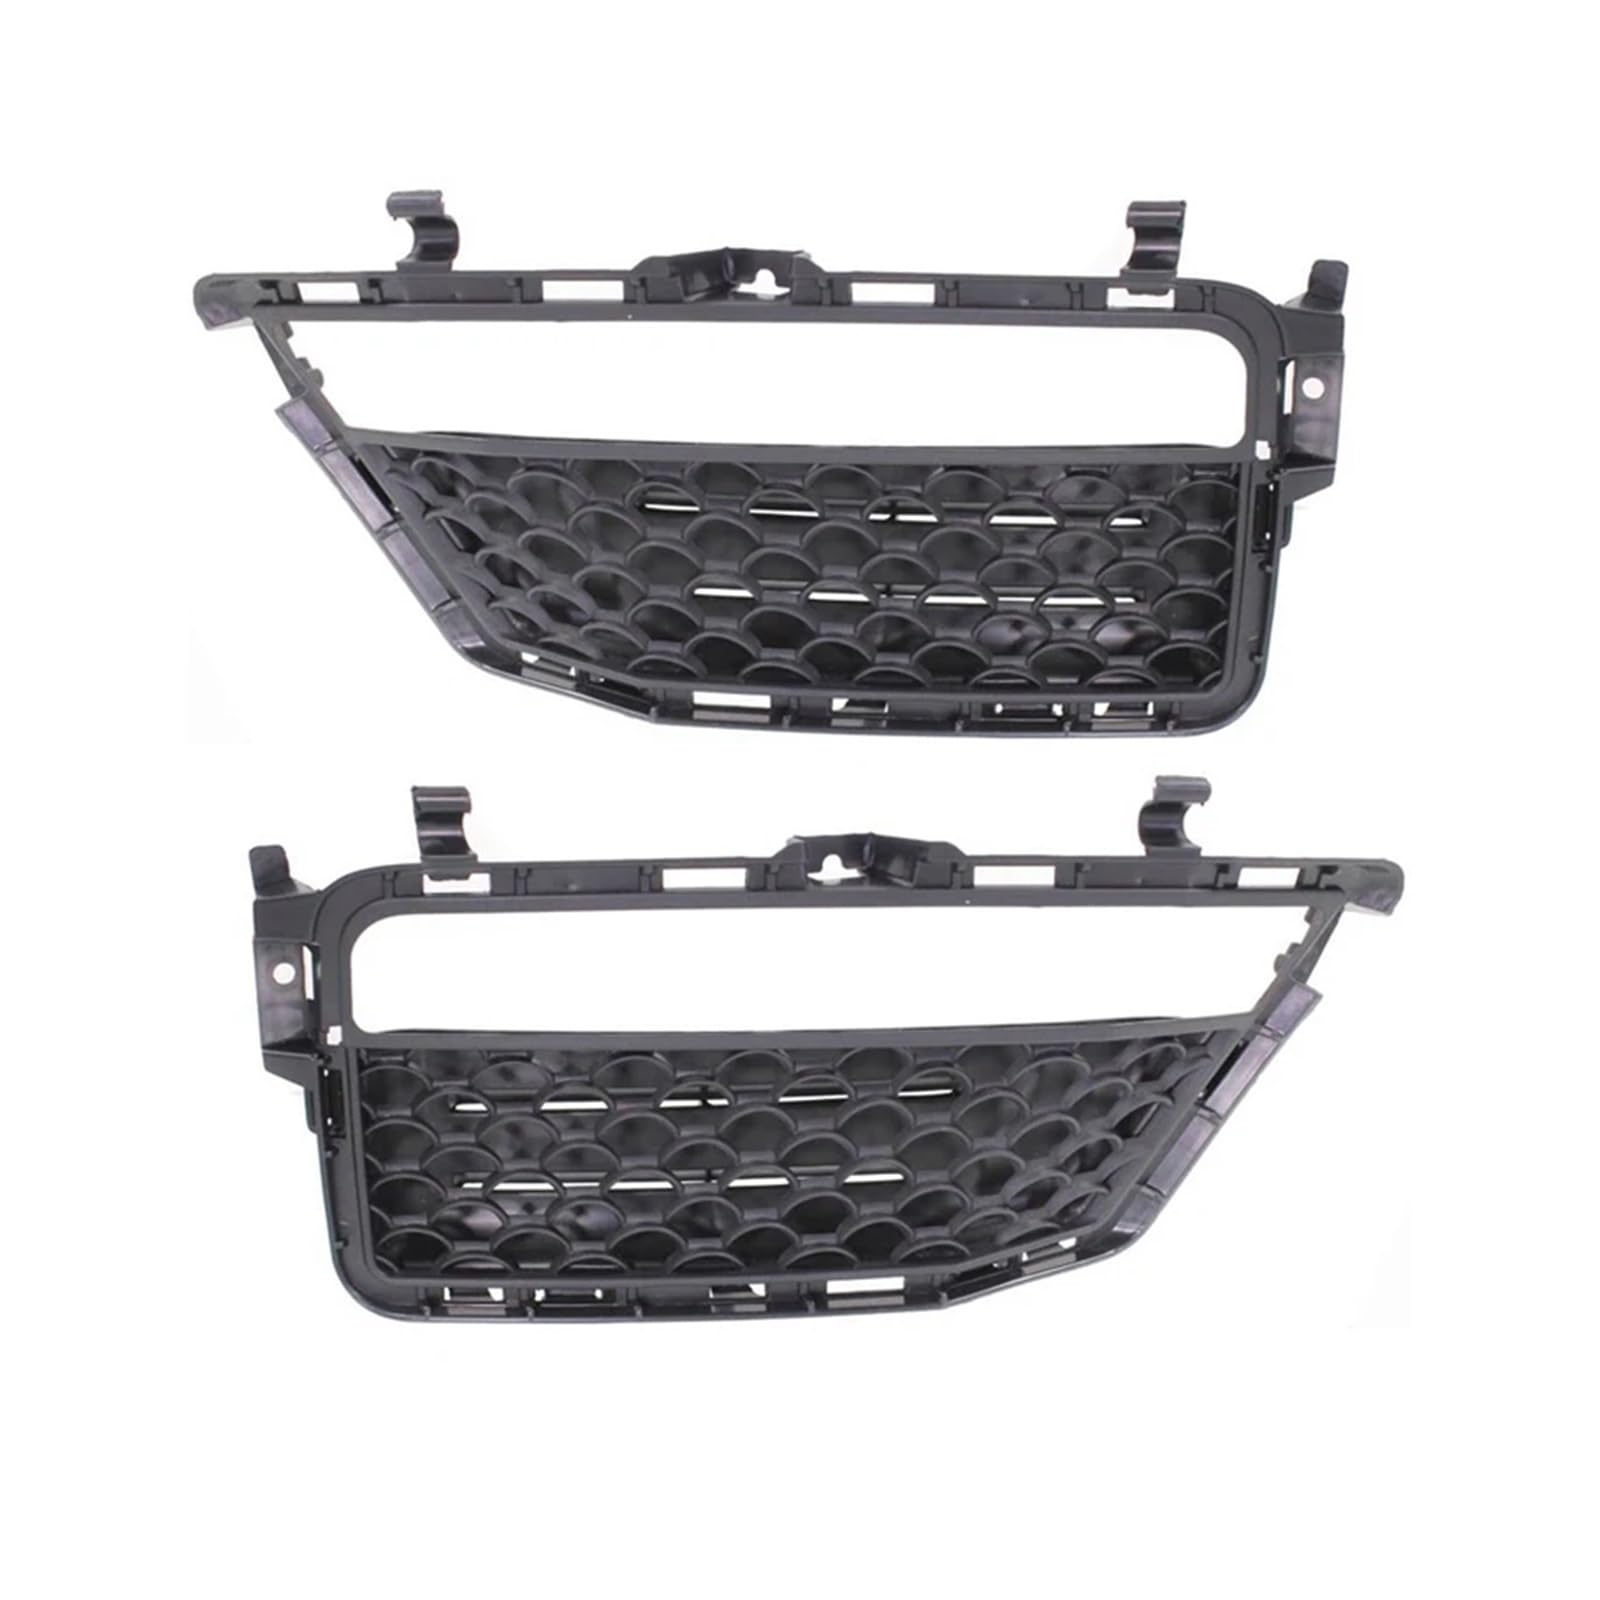 Auto Fog Lamp Grille Front Daytime Running Light Fog Lamp Frame Car Compatible For Mercedes S-class W221 S63 S65 2011-2013(1 Left and 1 Right) von BRANISLVV